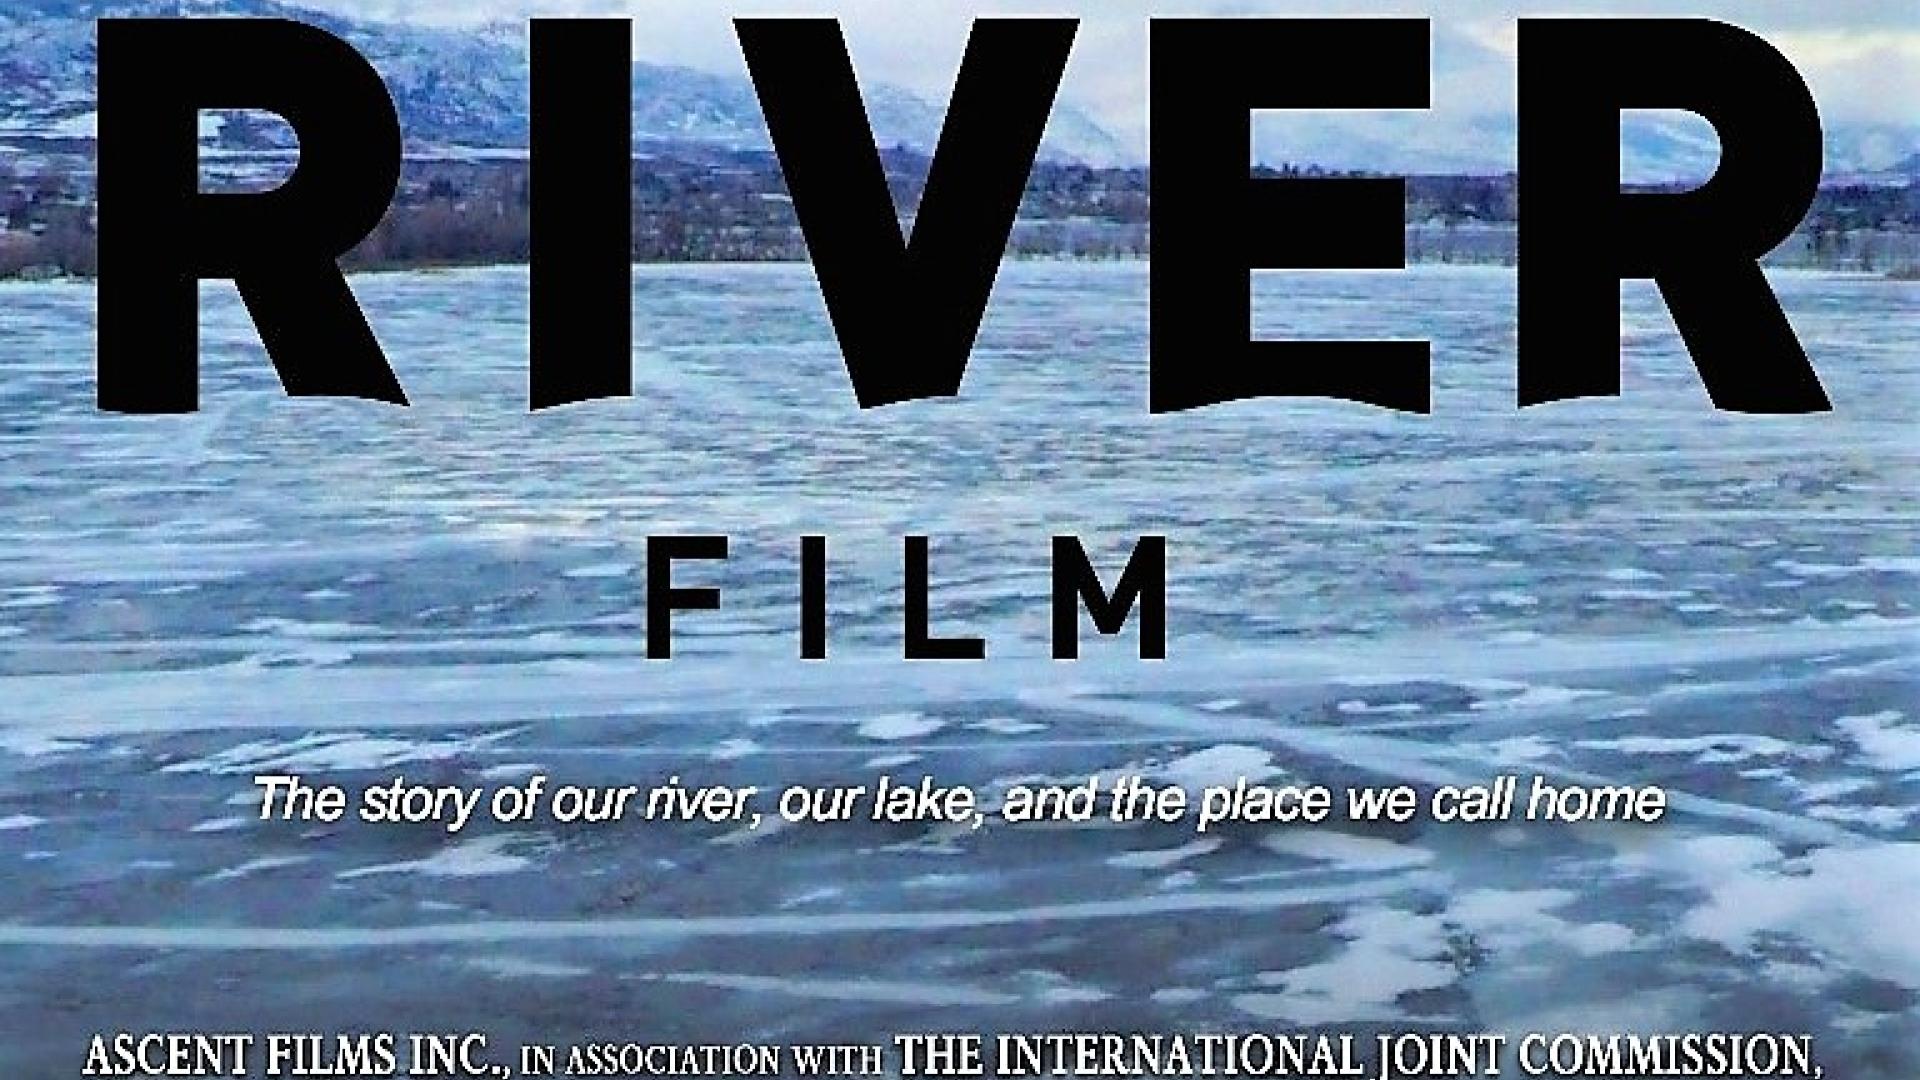 Flyer for A River Film documentary